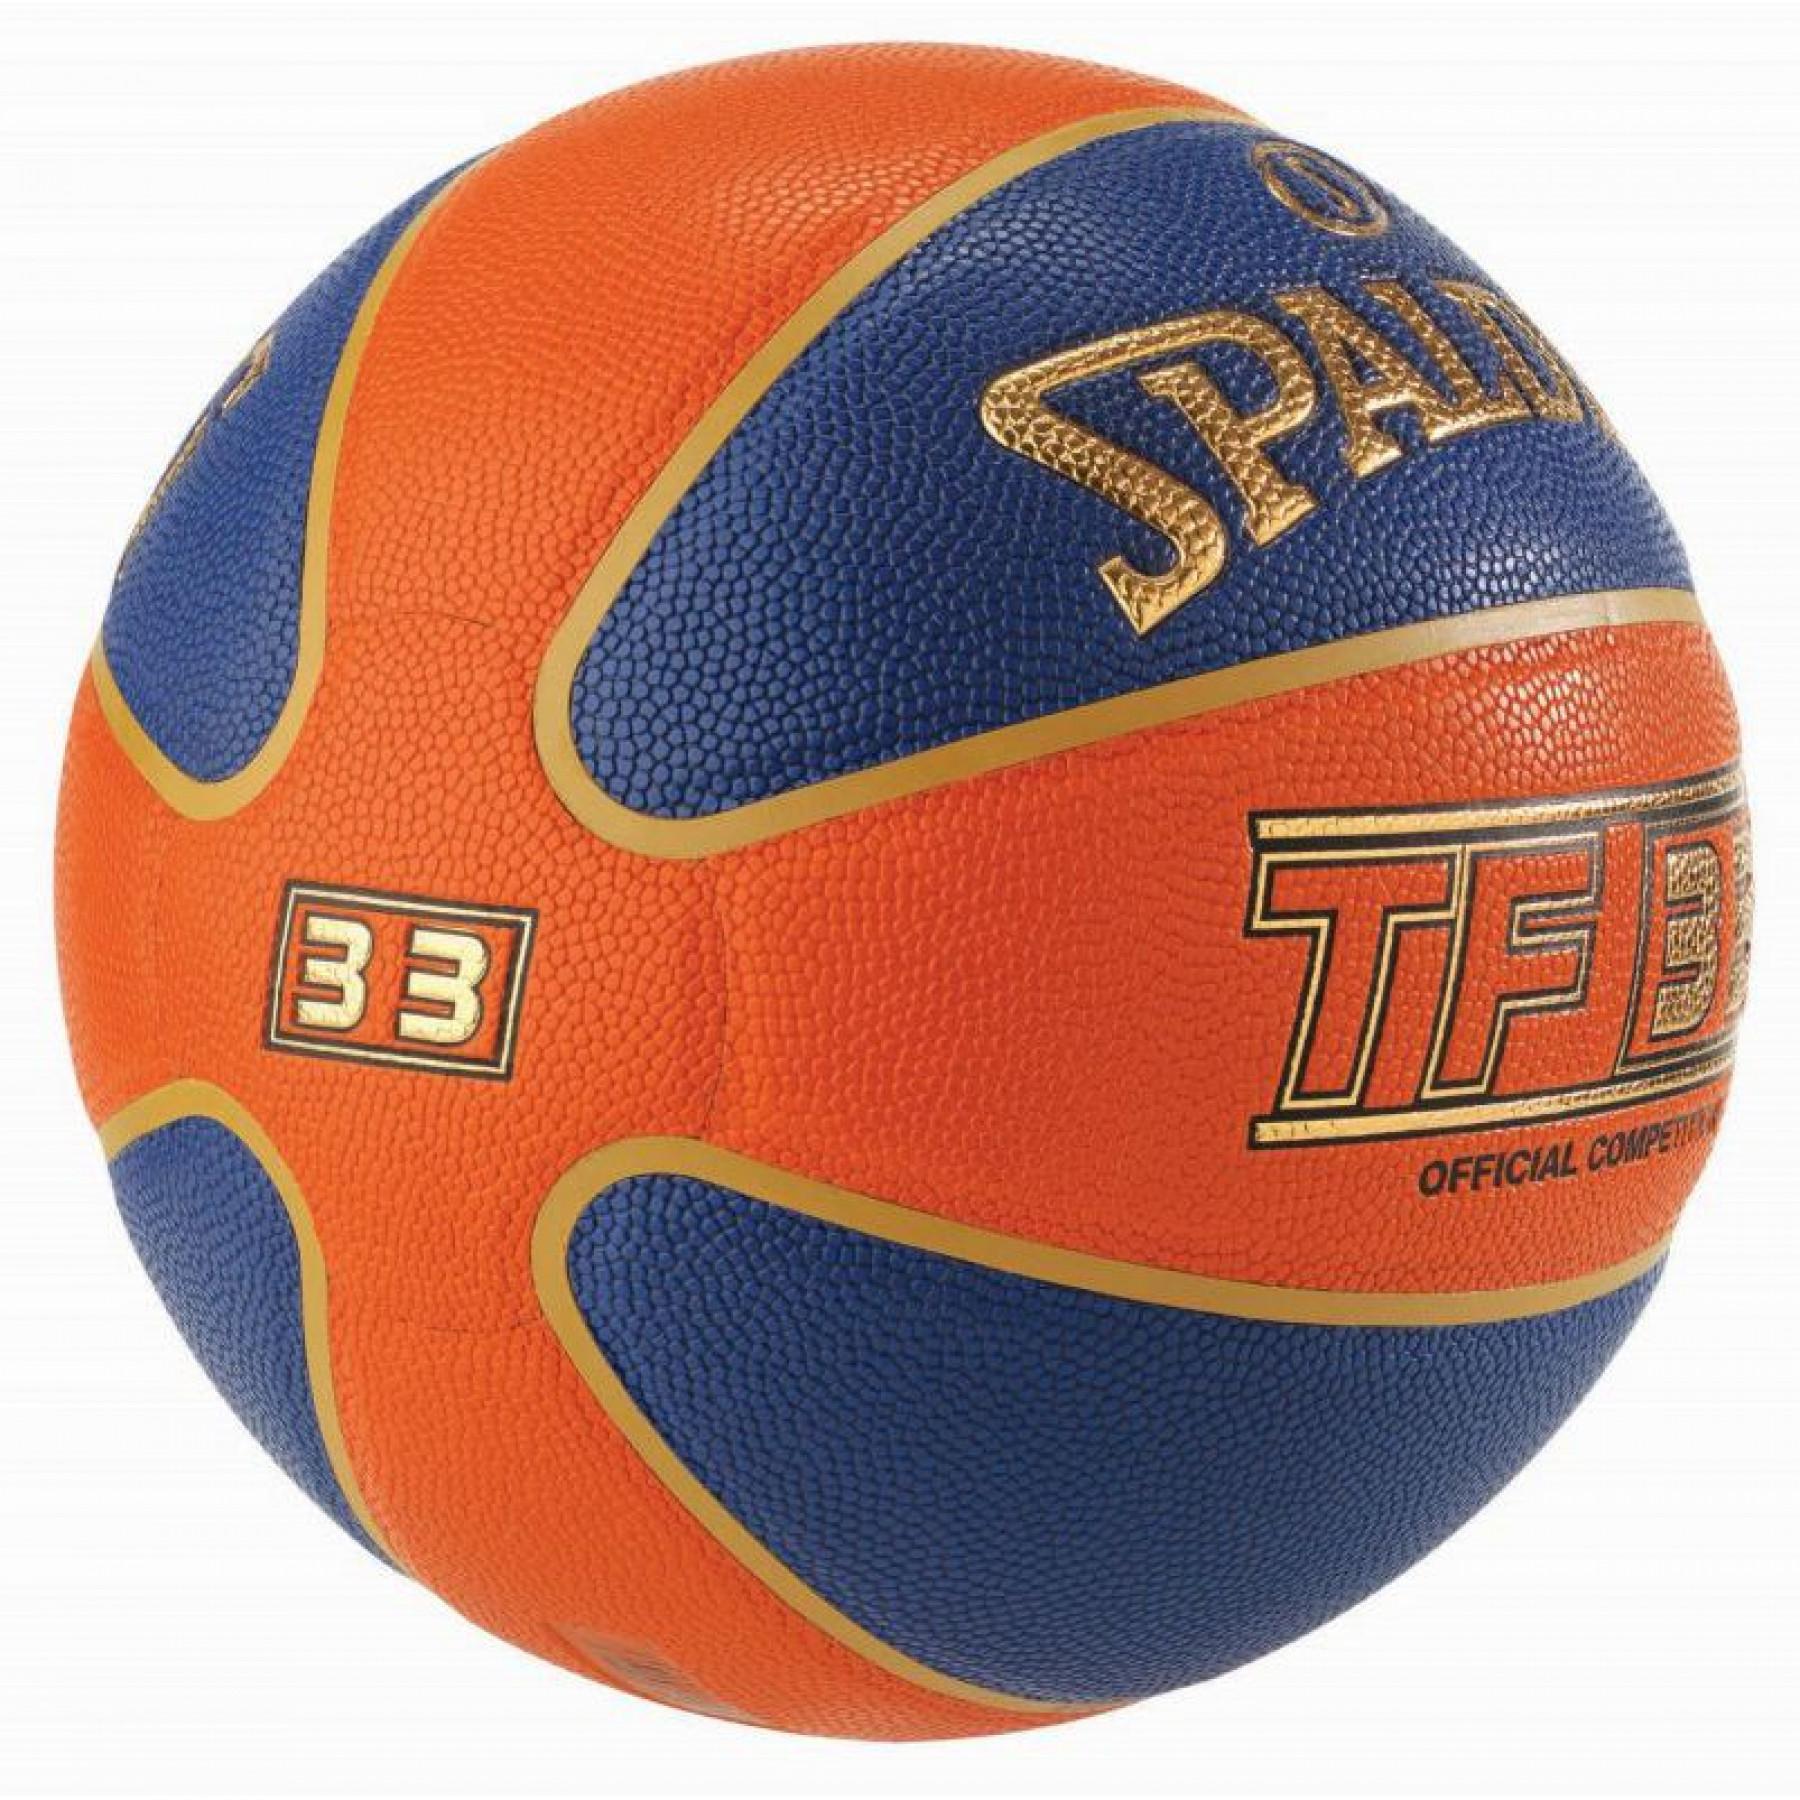 Ballong Spalding TF 33 In/Out